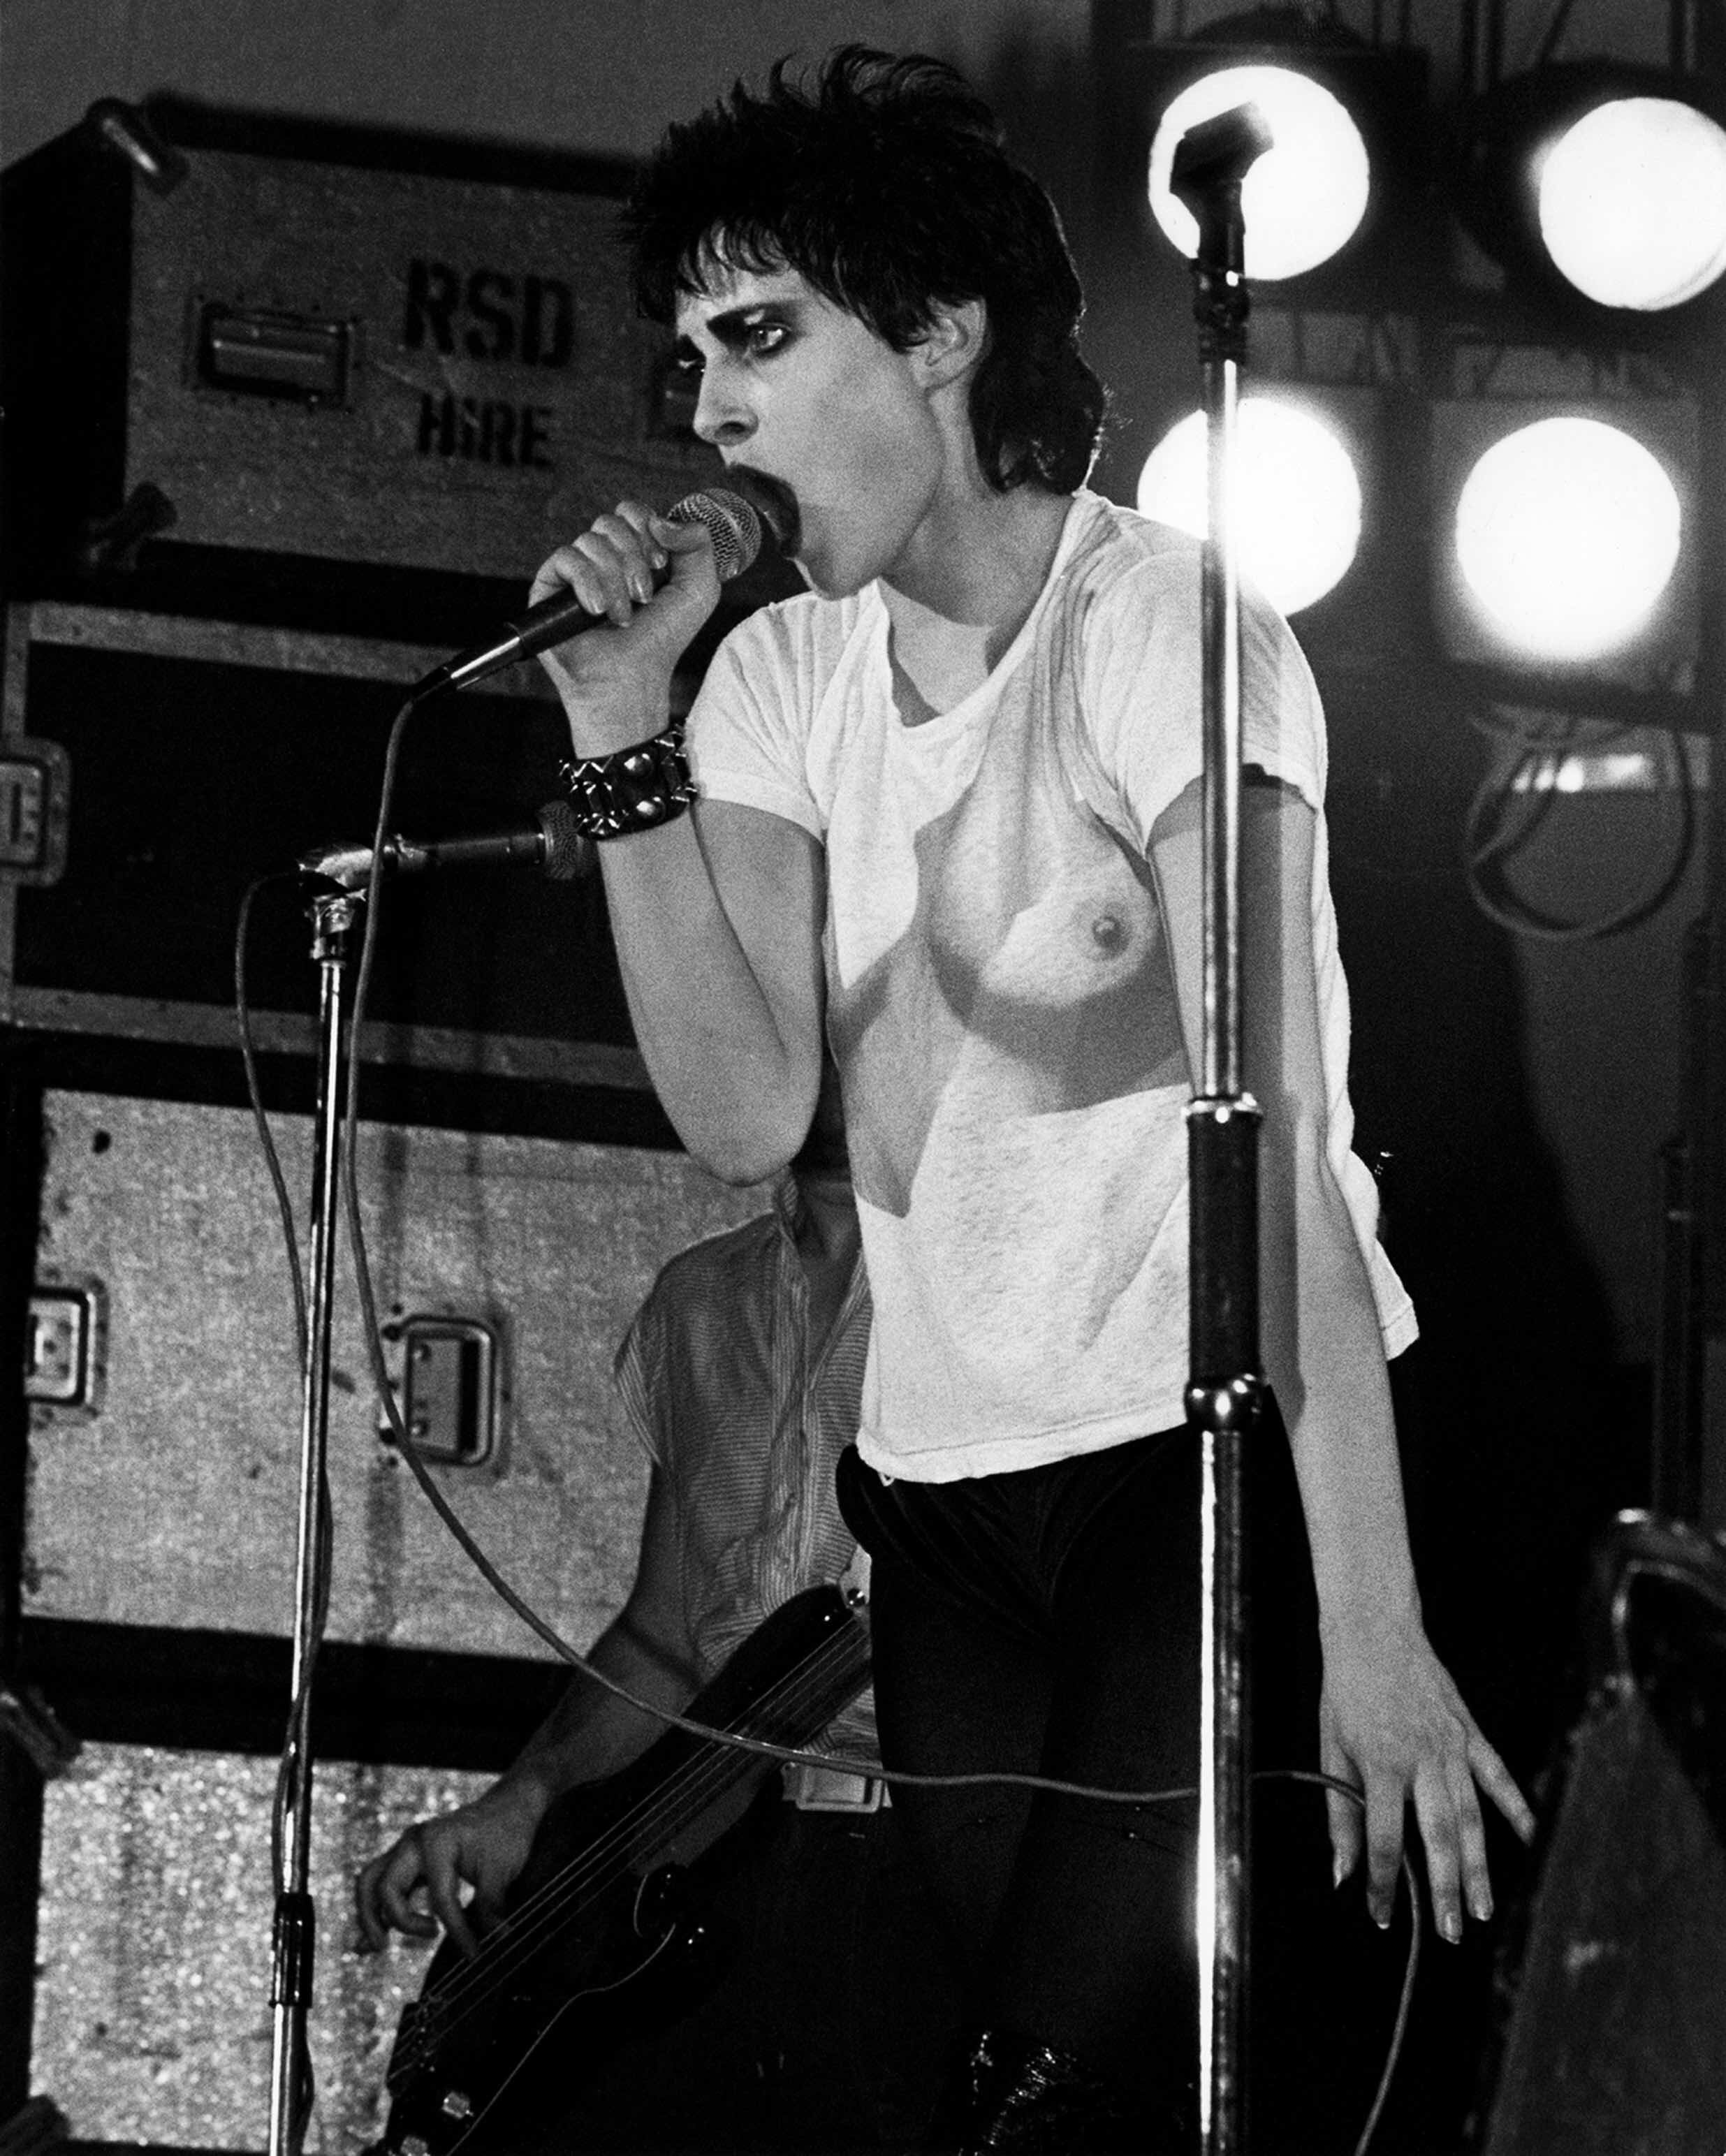 Siouxsie Sioux live at The 100 Club, London, 1977